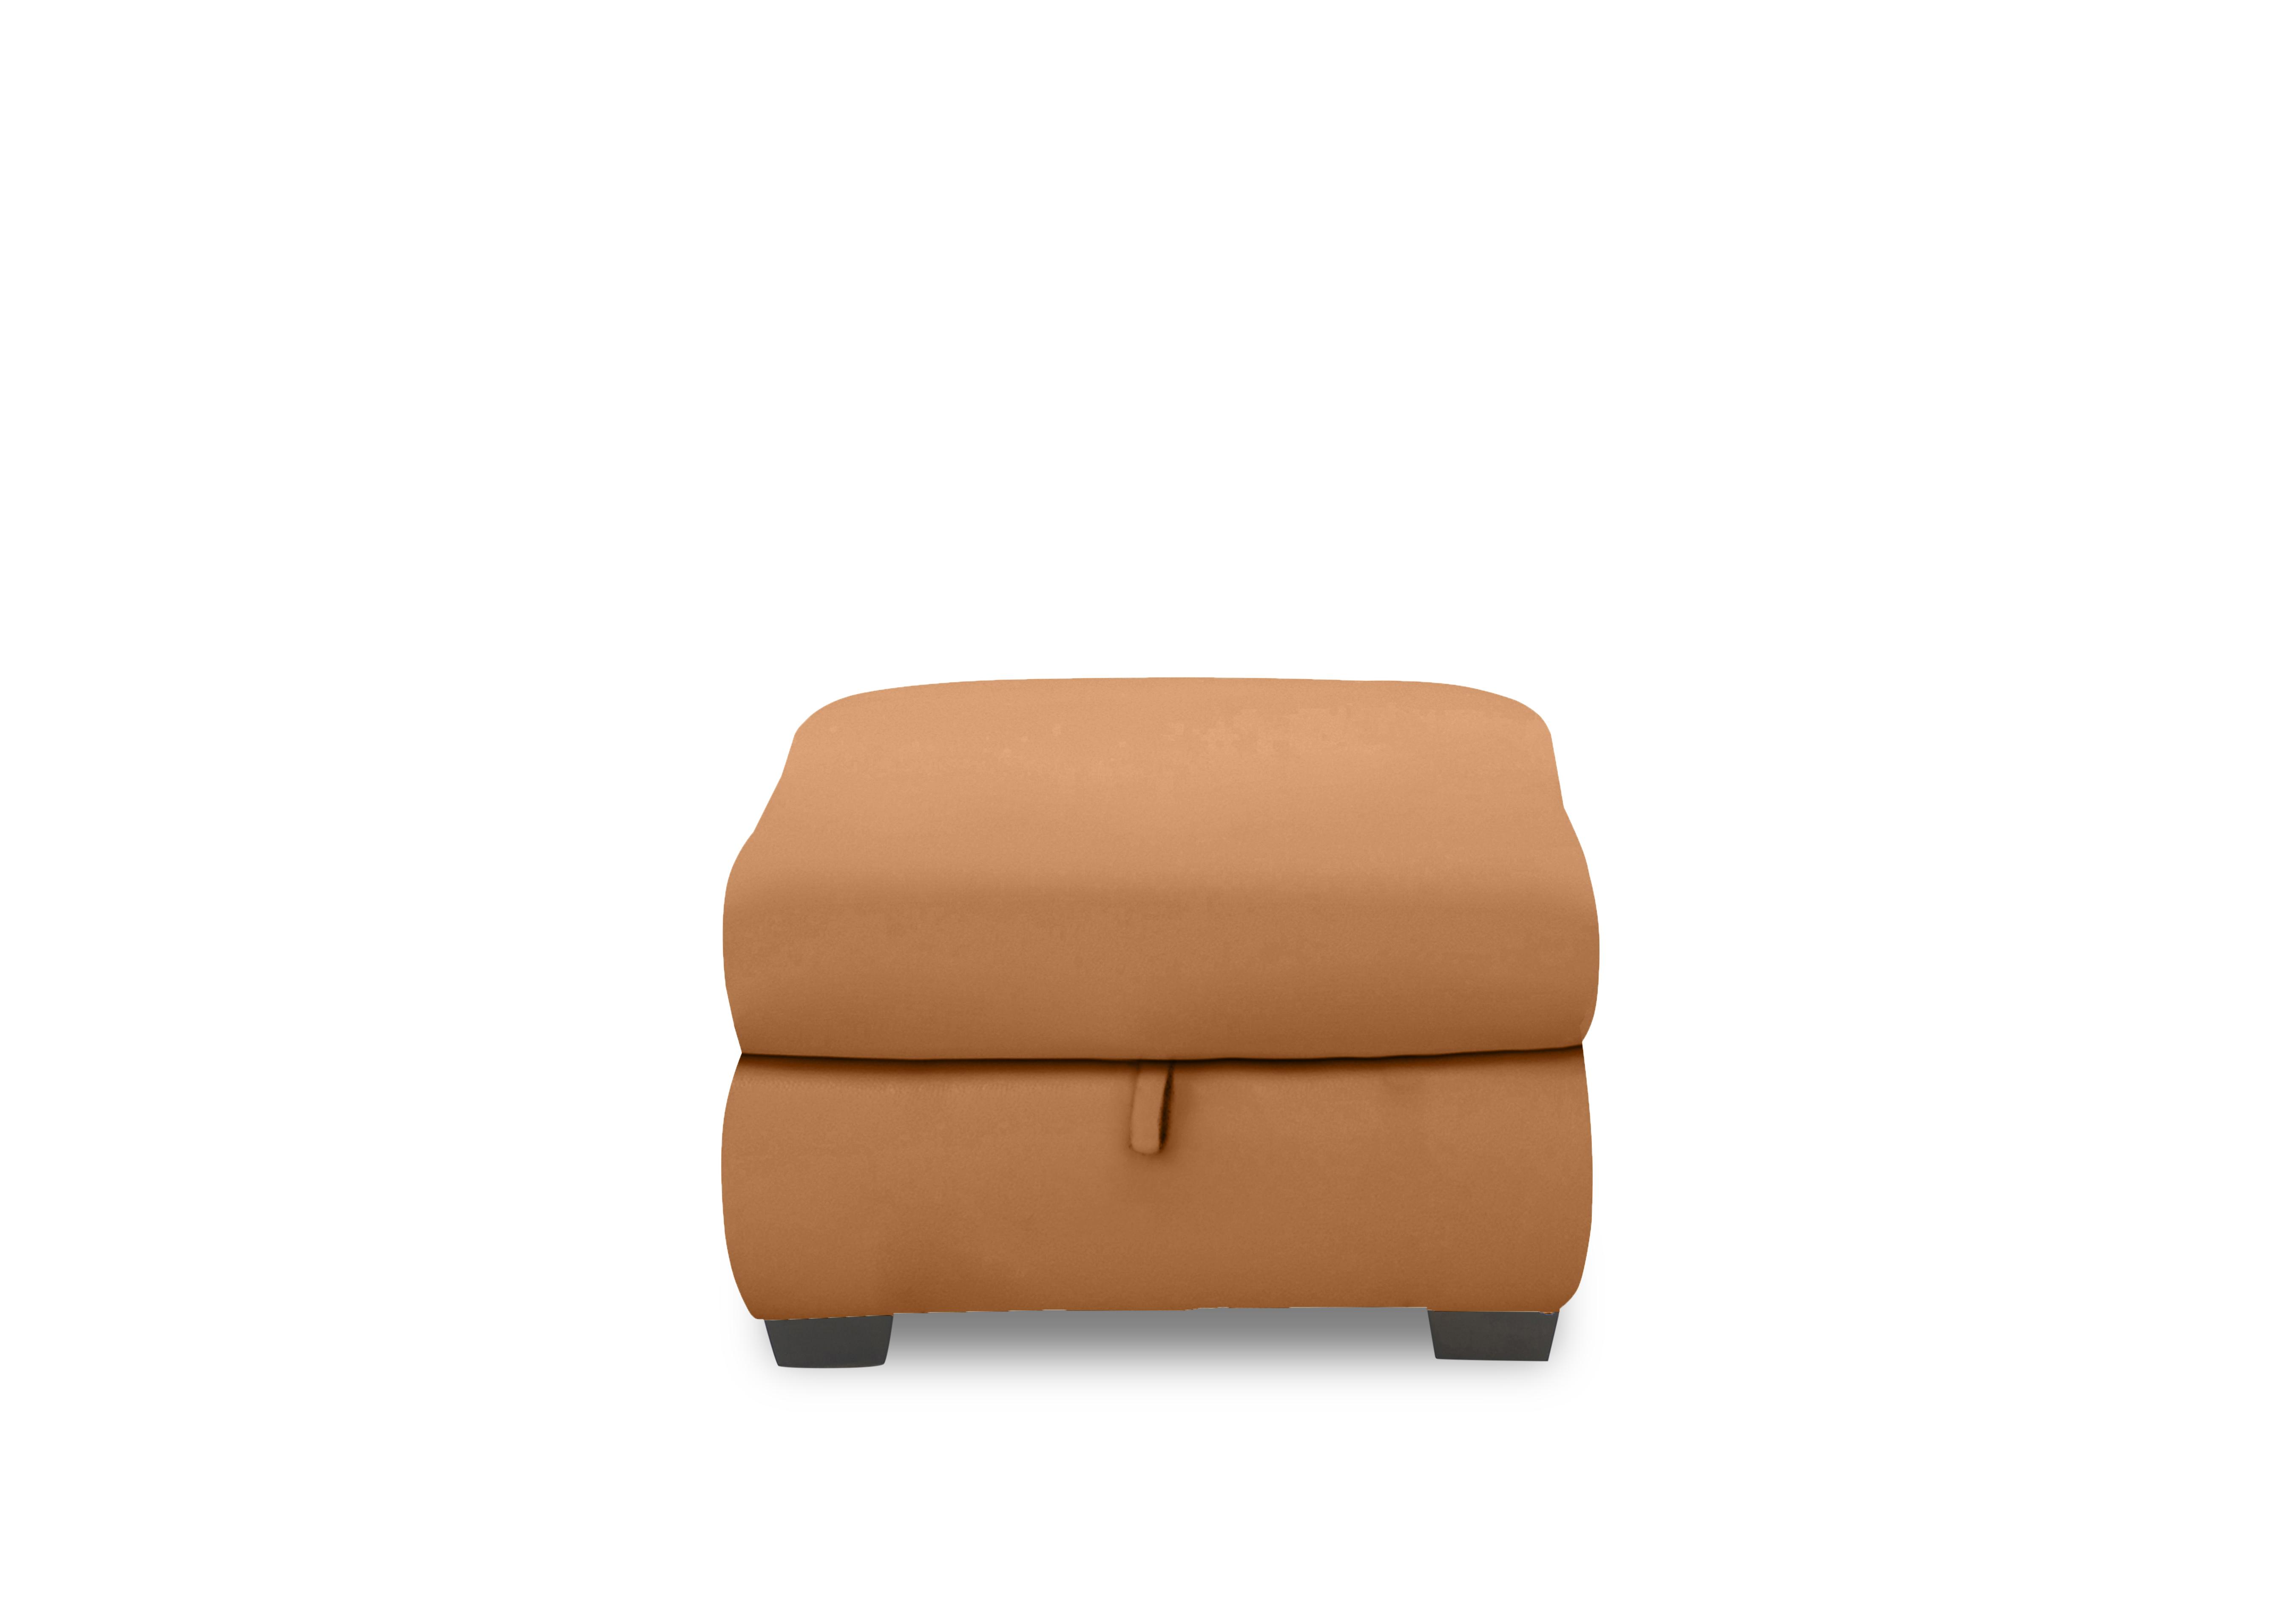 Nixon Leather Storage Footstool in Bv-335e Honey Yellow on Furniture Village